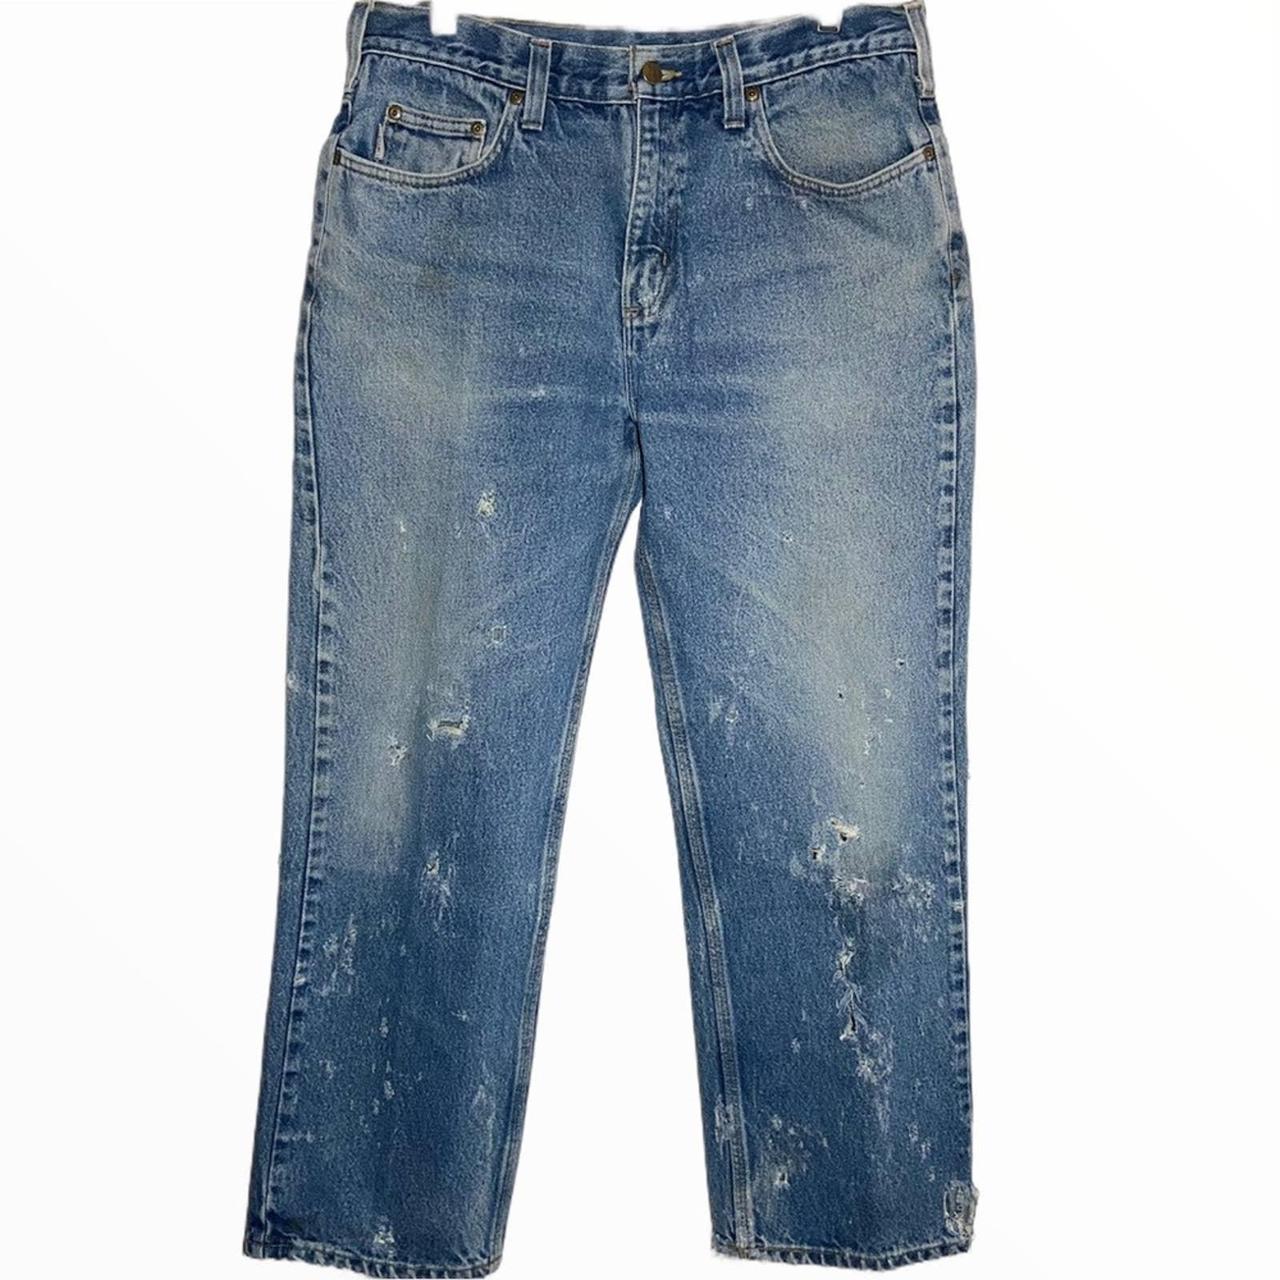 Product Image 1 - Carhartt Trashed Jeans Relaxed Fit